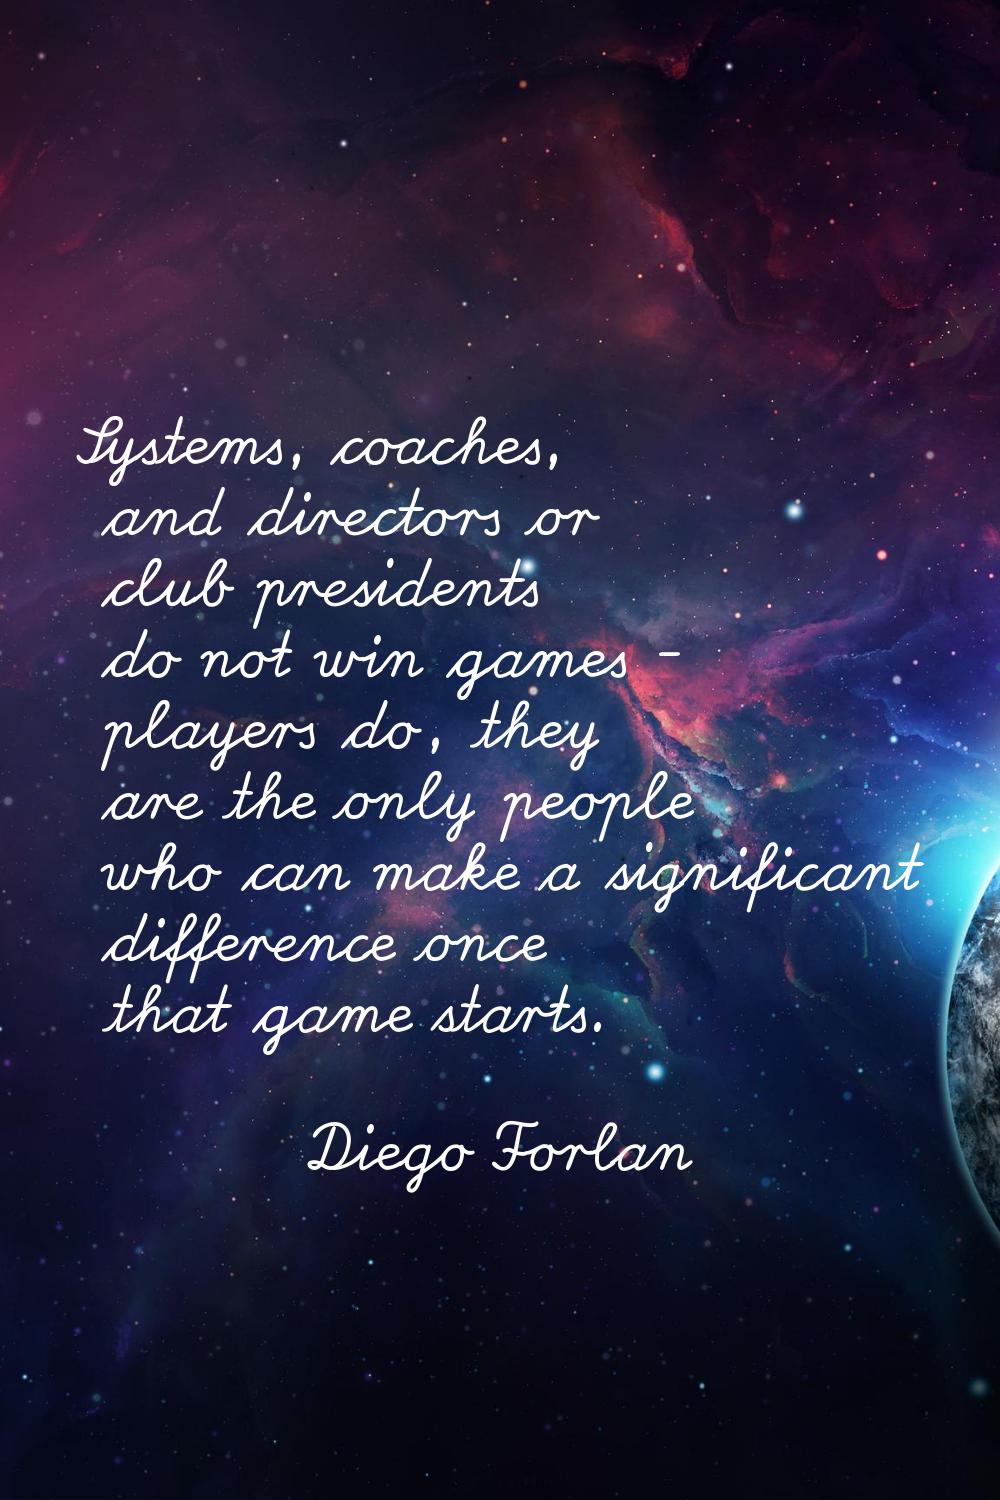 Systems, coaches, and directors or club presidents do not win games - players do, they are the only